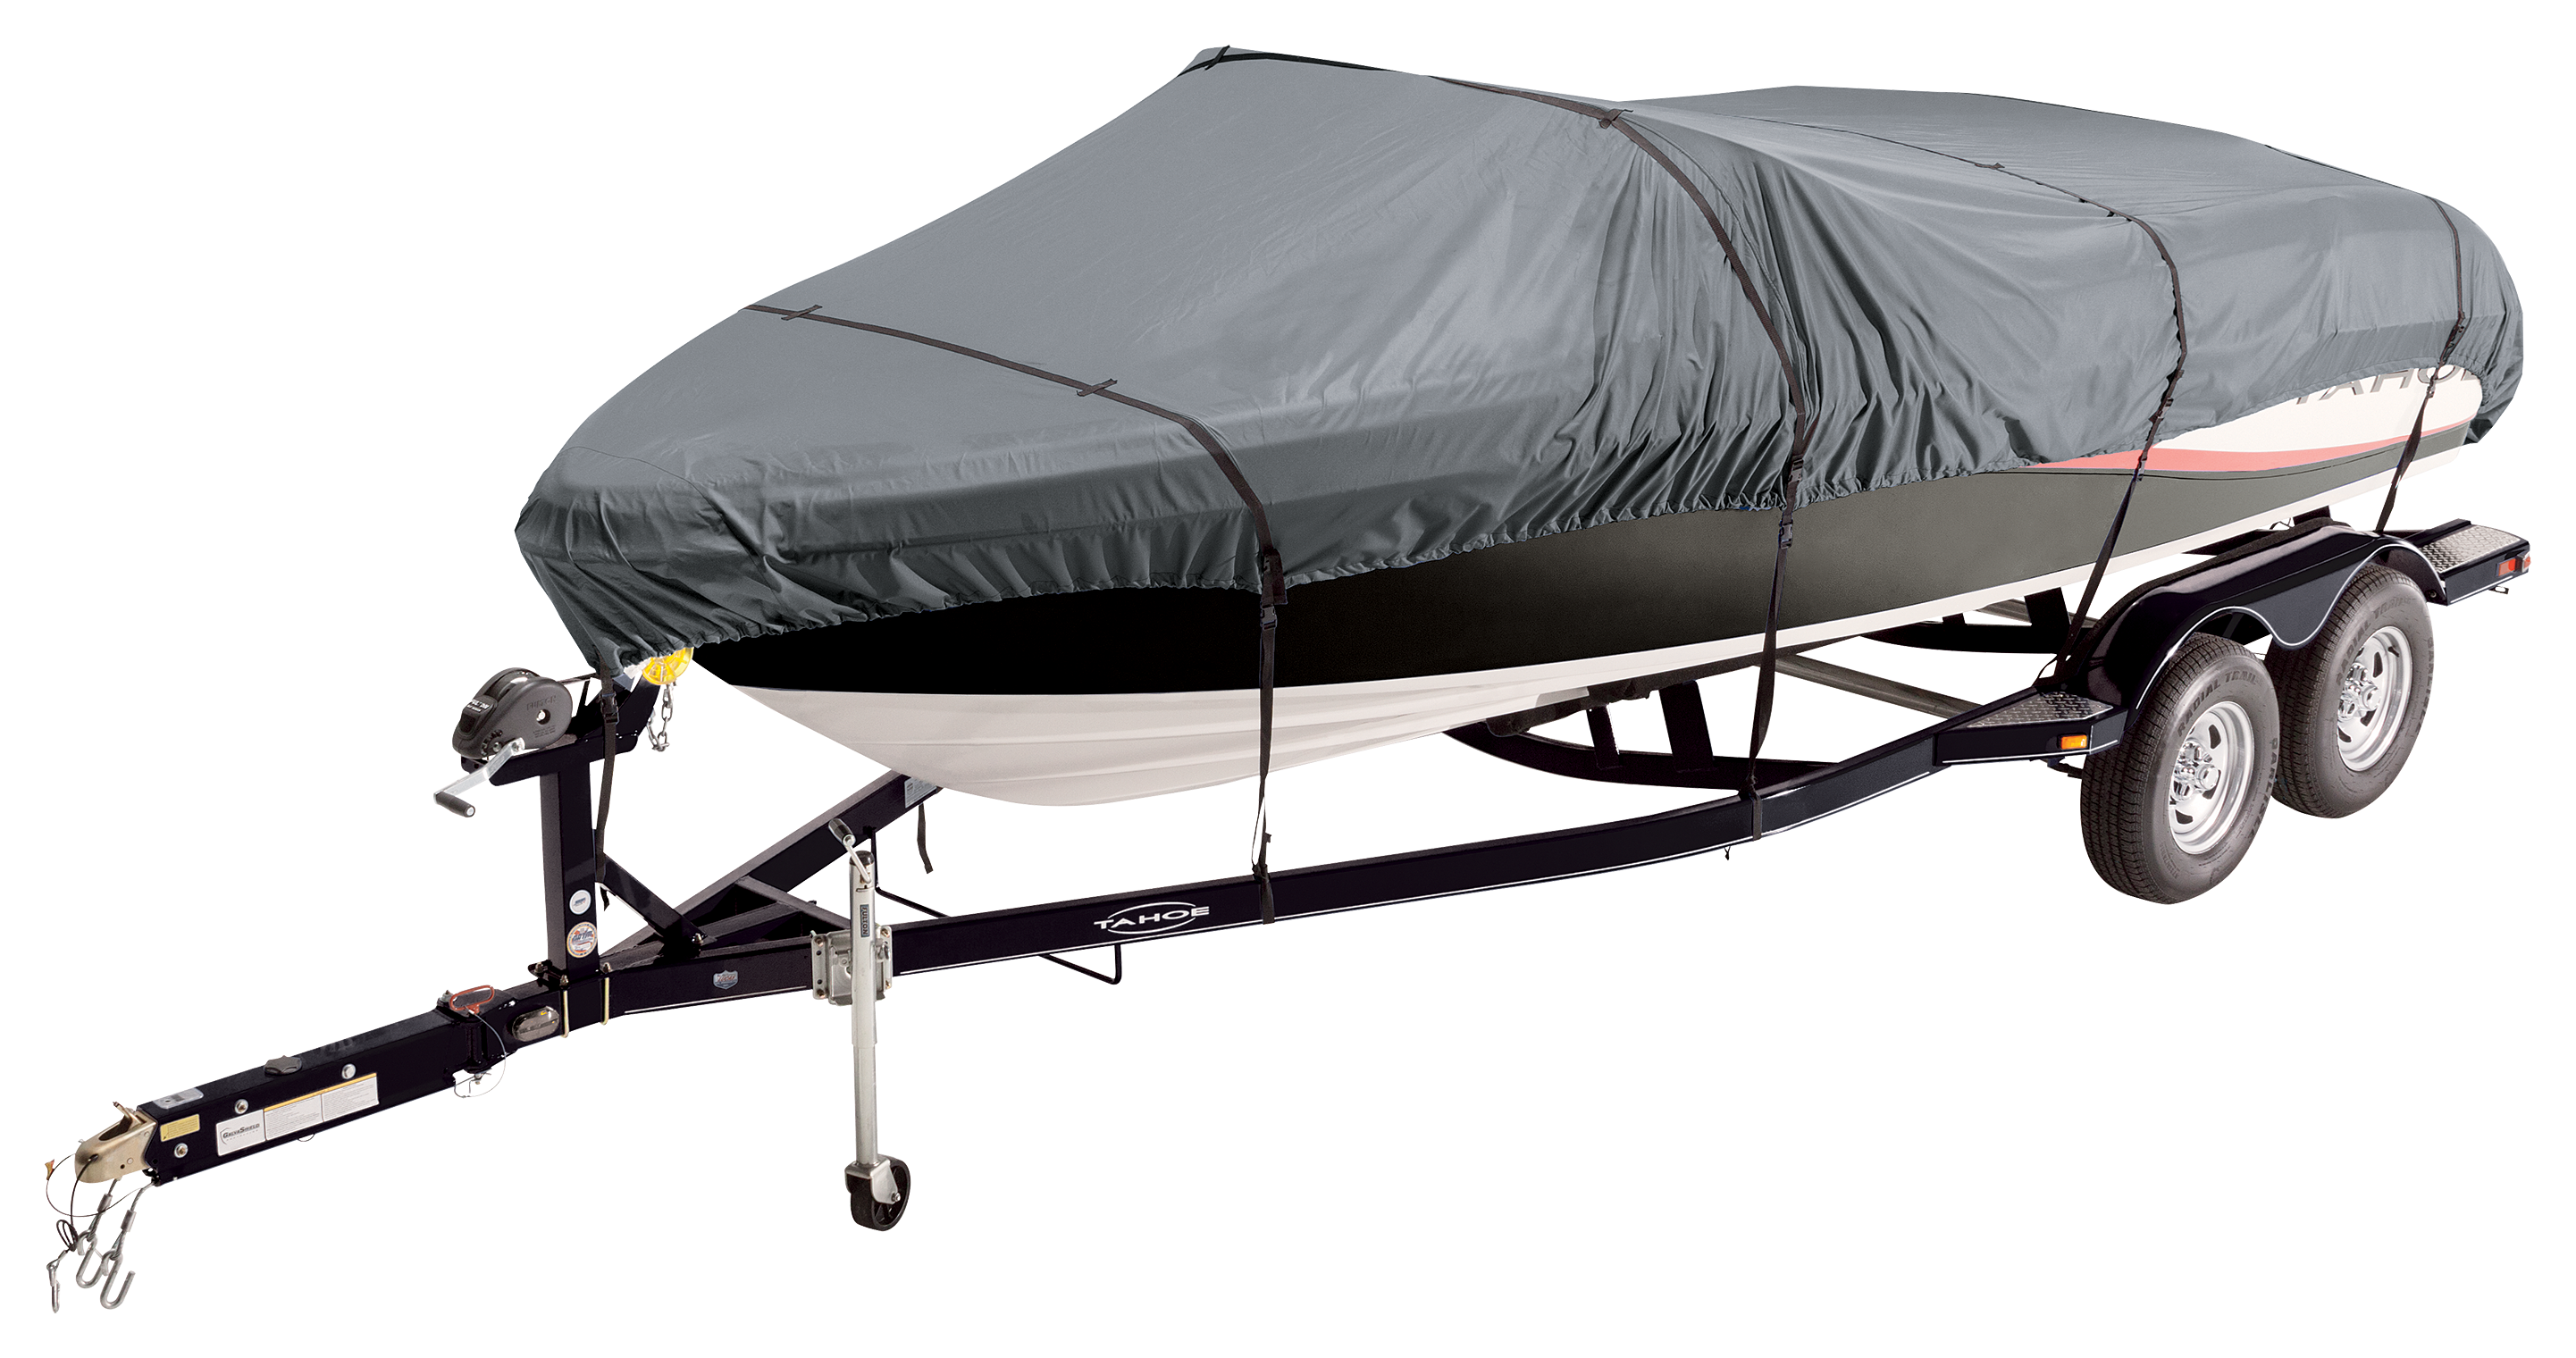 Aluminum Fishing Boat Extra Wide Outboard, Select Fit Boat Cover